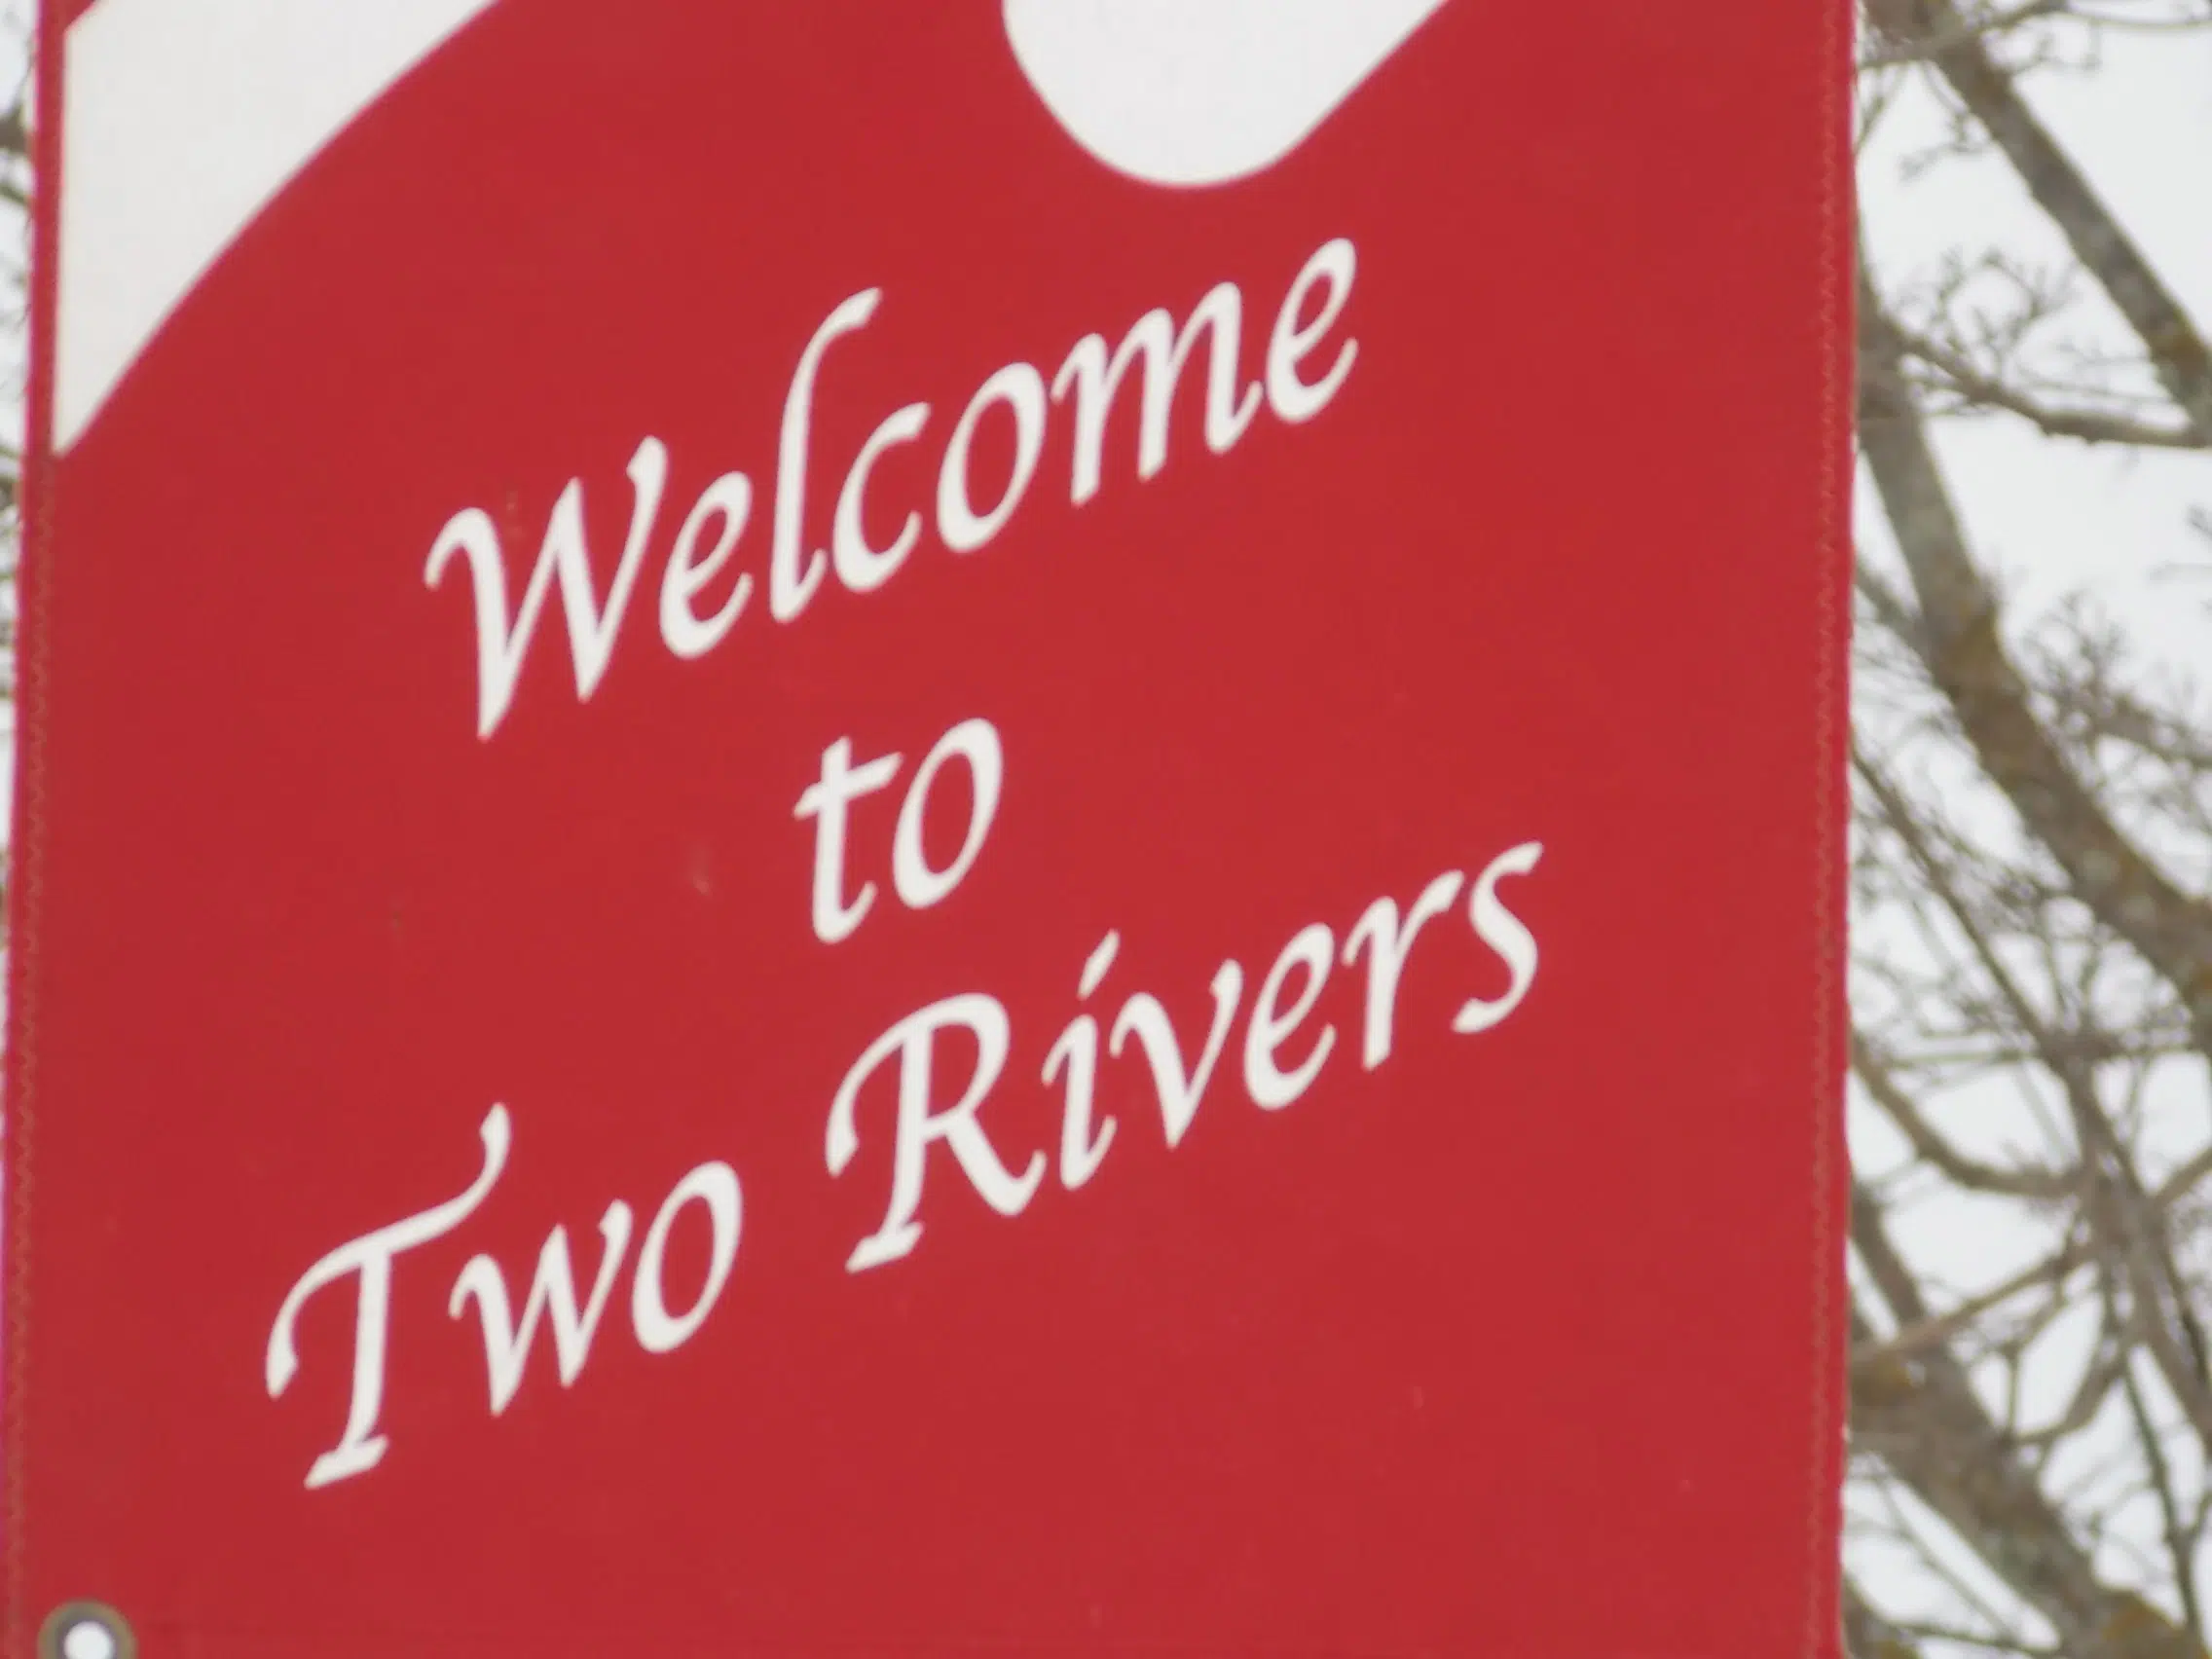 City of Two Rivers Meetings